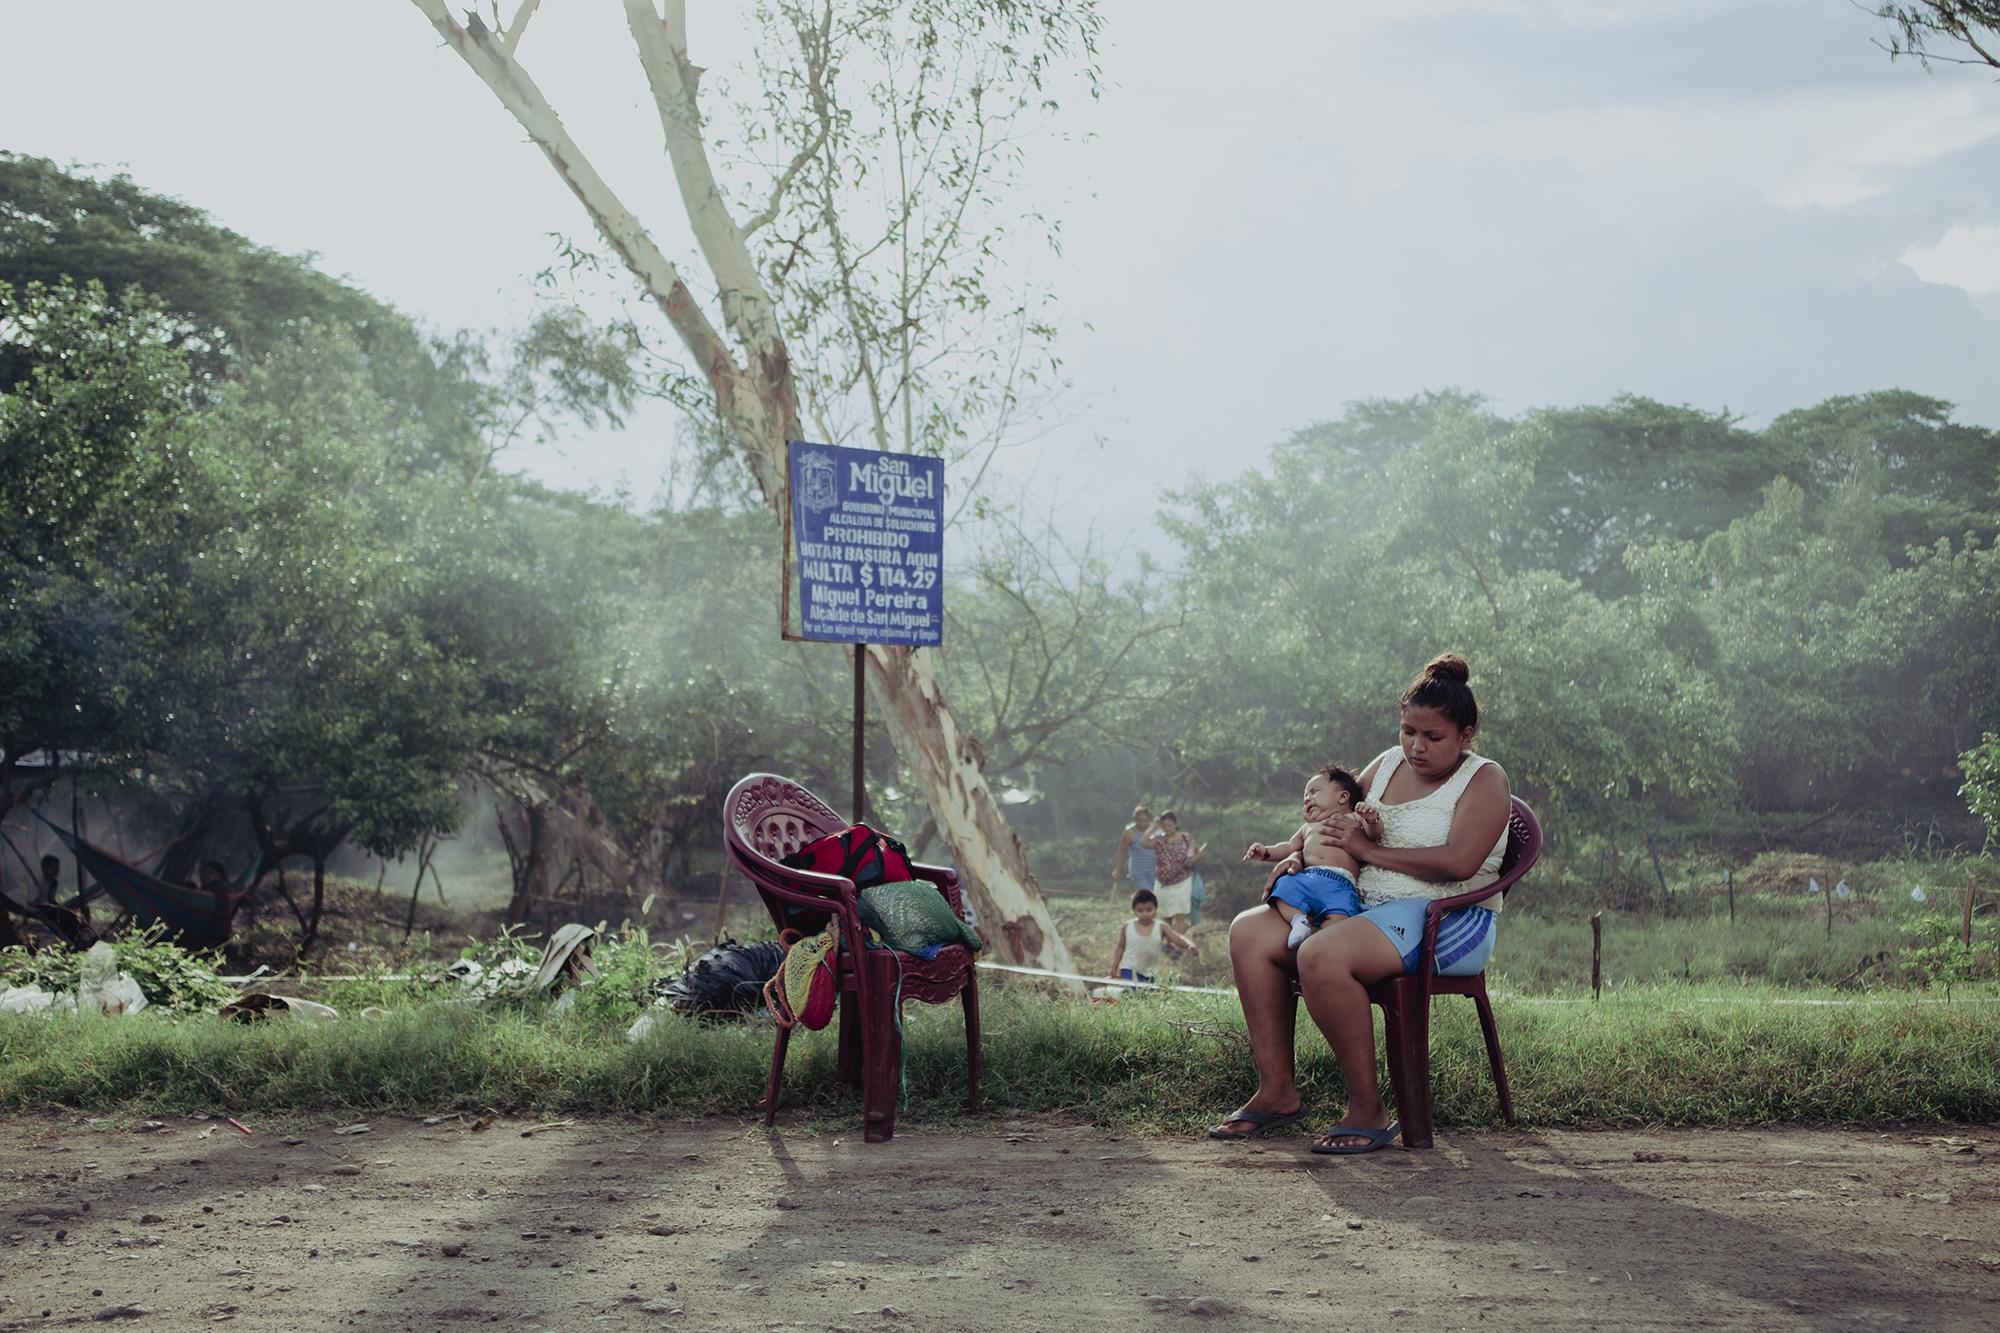 Stefany Gómez rests with her son in the shade of a tree on a plot of land near the Río Grande of San Miguel. While she takes care of her son, her partner washes cars in town. Of their monthly earnings of $250, they paid $75 to rent a room prior to Covid-19. Since the start of the pandemic, Stefany gave birth and her husband wound up unemployed. With a newborn at home and the fallout of the quarantine, they decided to leave their old home in search of a place where they could save money and start fresh. 